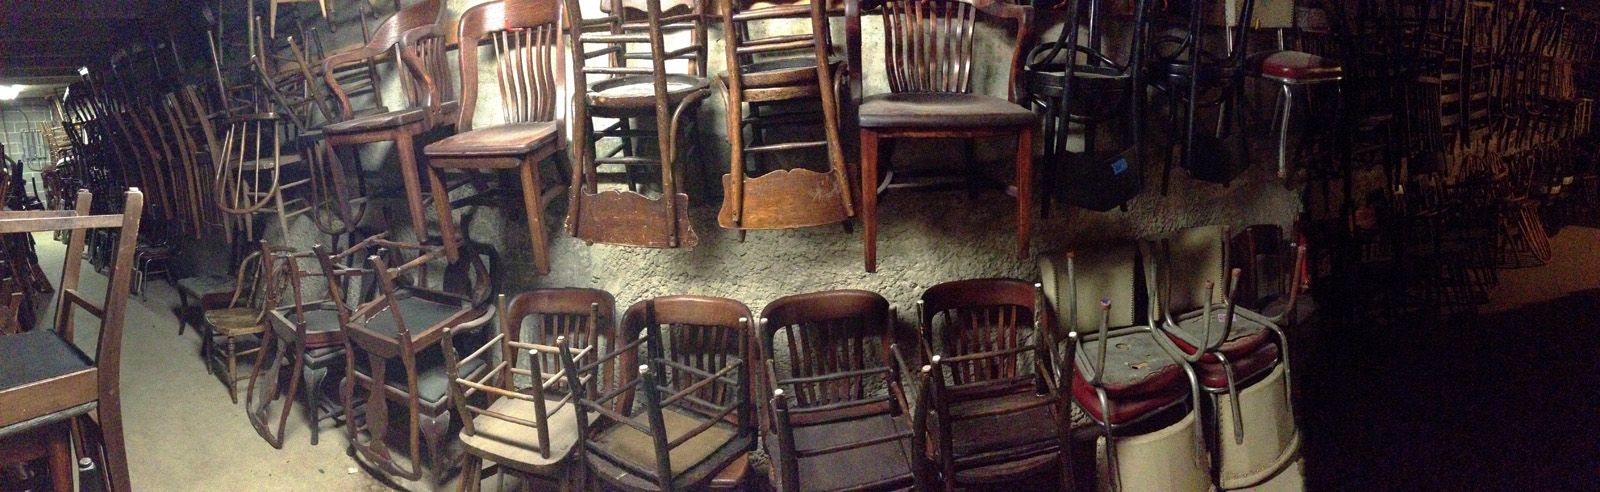 Chairs as far as the eye can see.